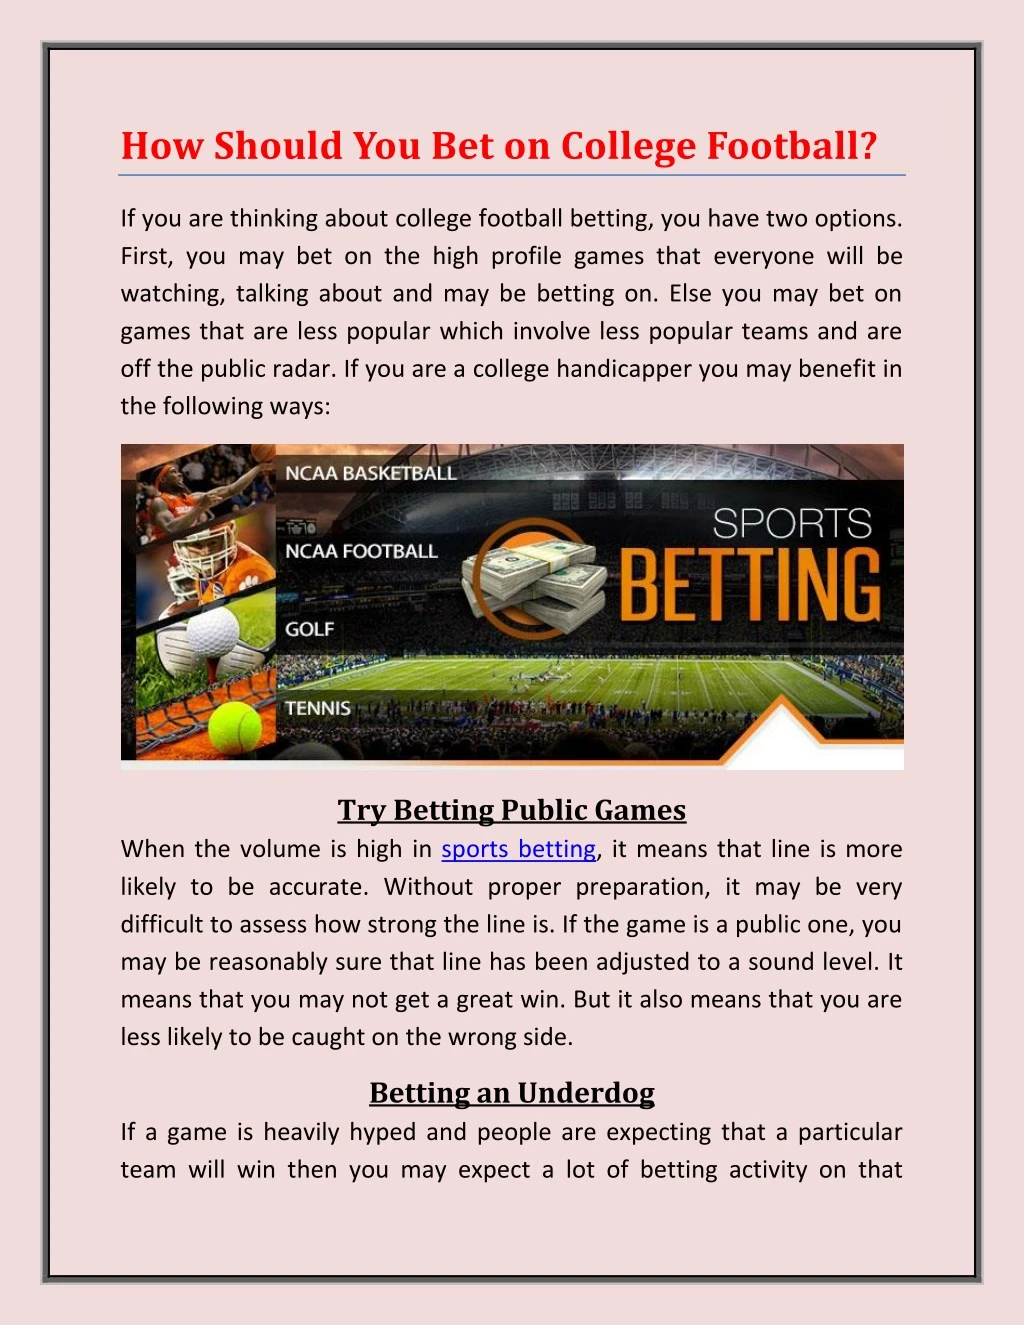 how should you bet on college football